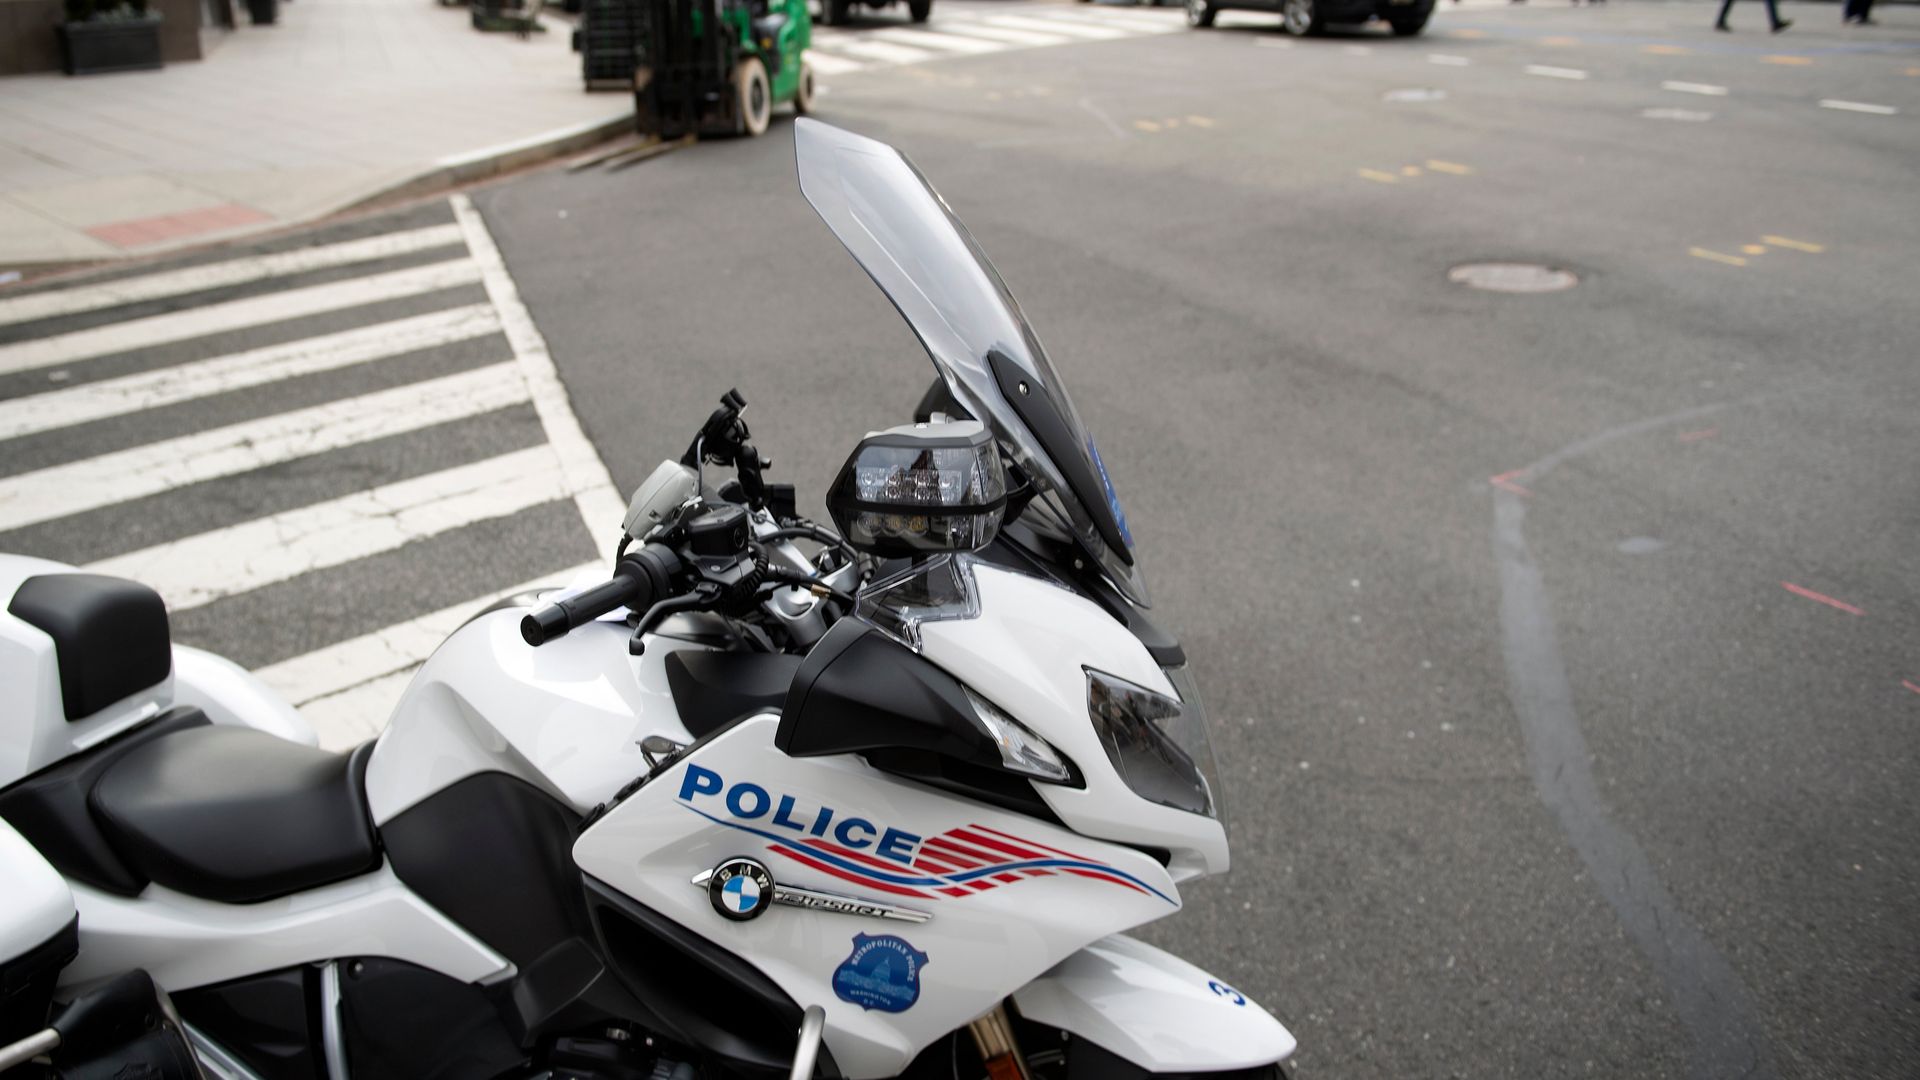 An MPD motorcycle